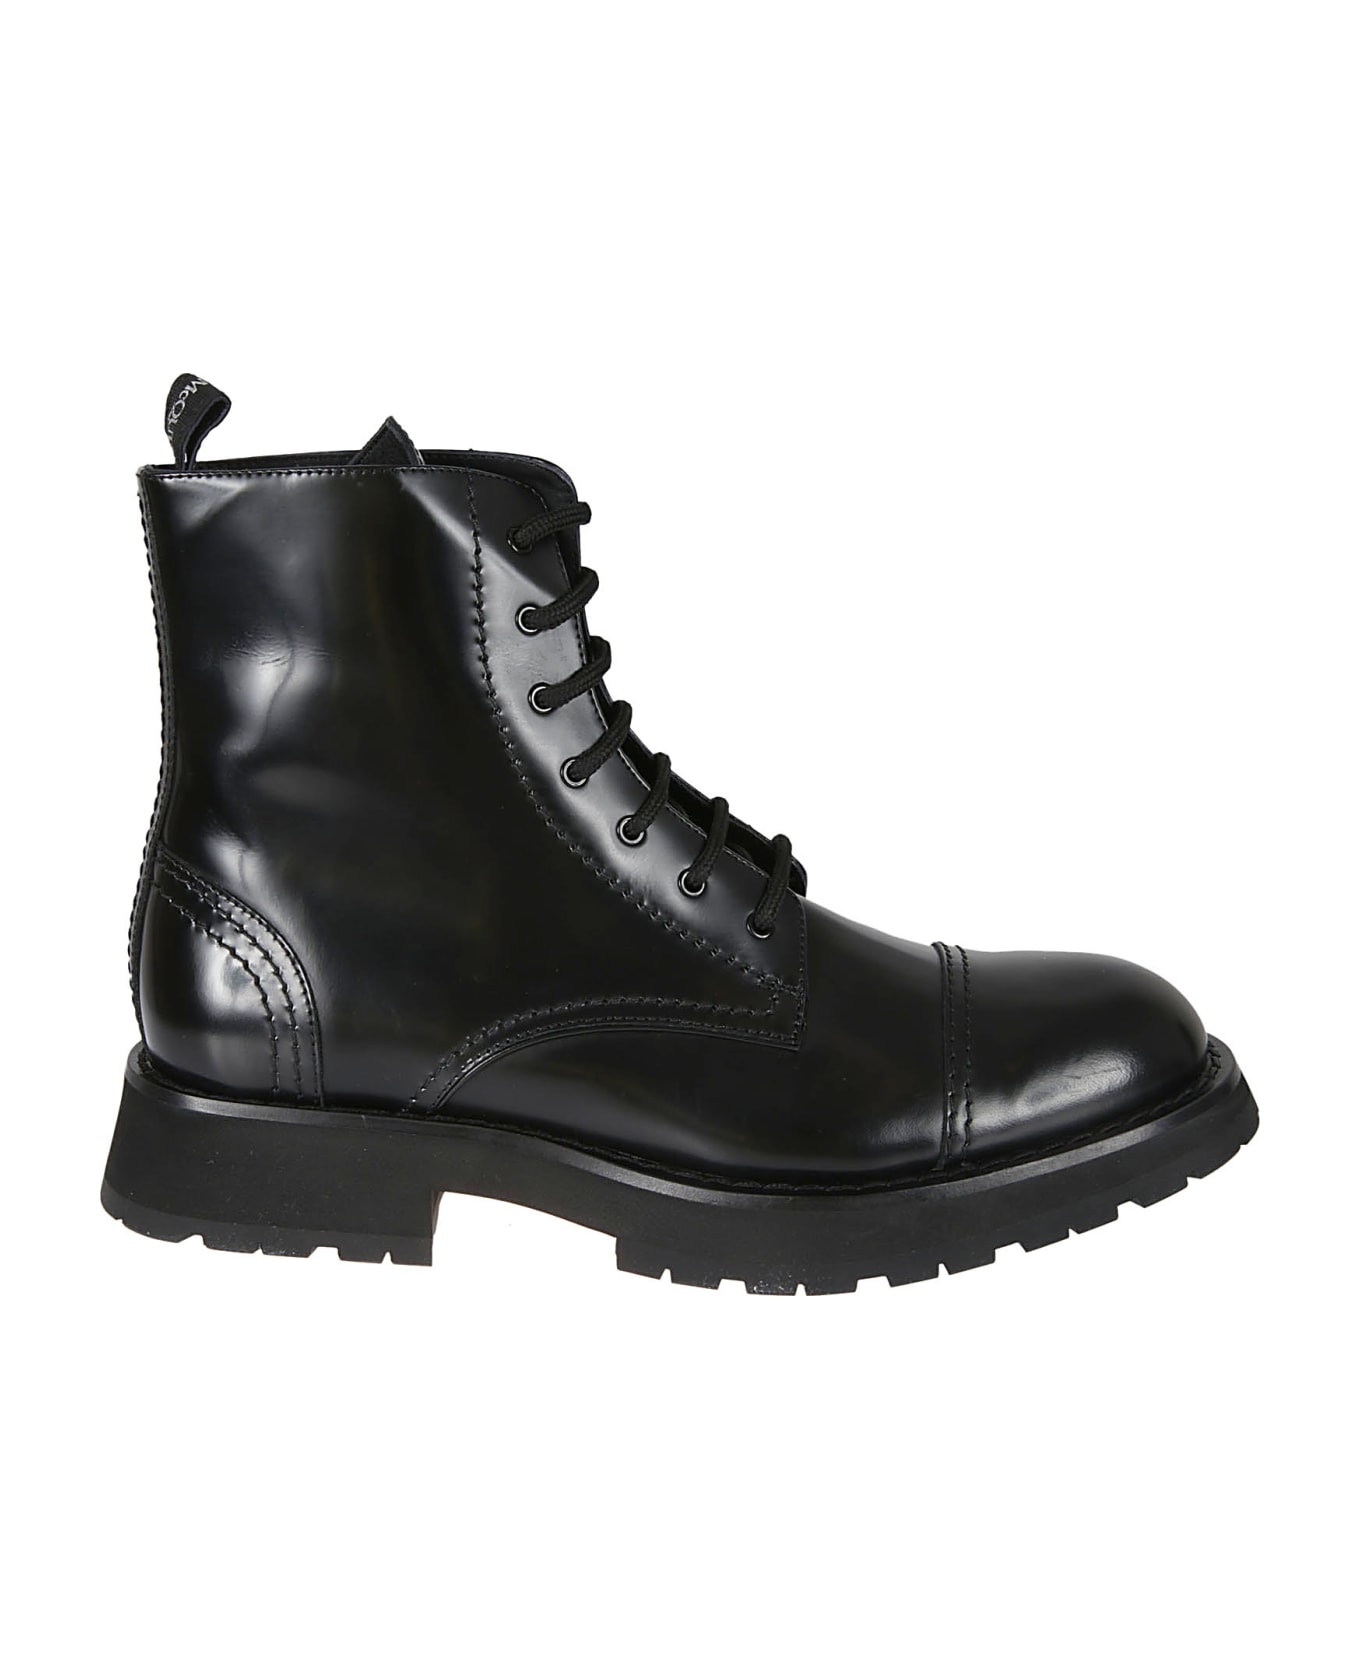 Alexander McQueen Lace-up Leather Boots - BLACK